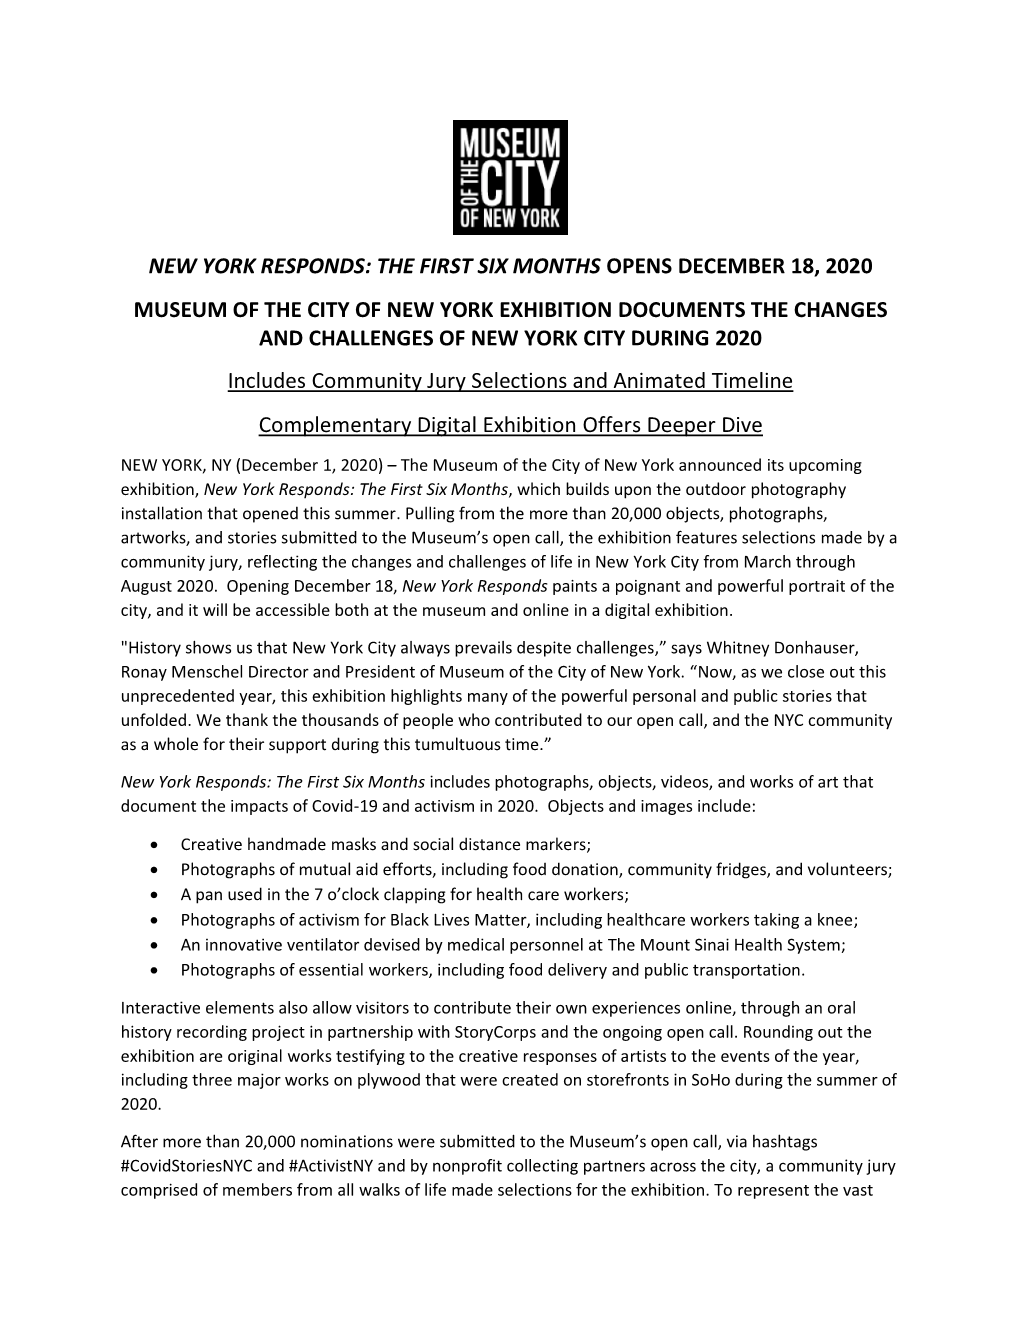 New York Responds: the First Six Months Opens December 18, 2020 Museum of the City of New York Exhibition Documents the Changes